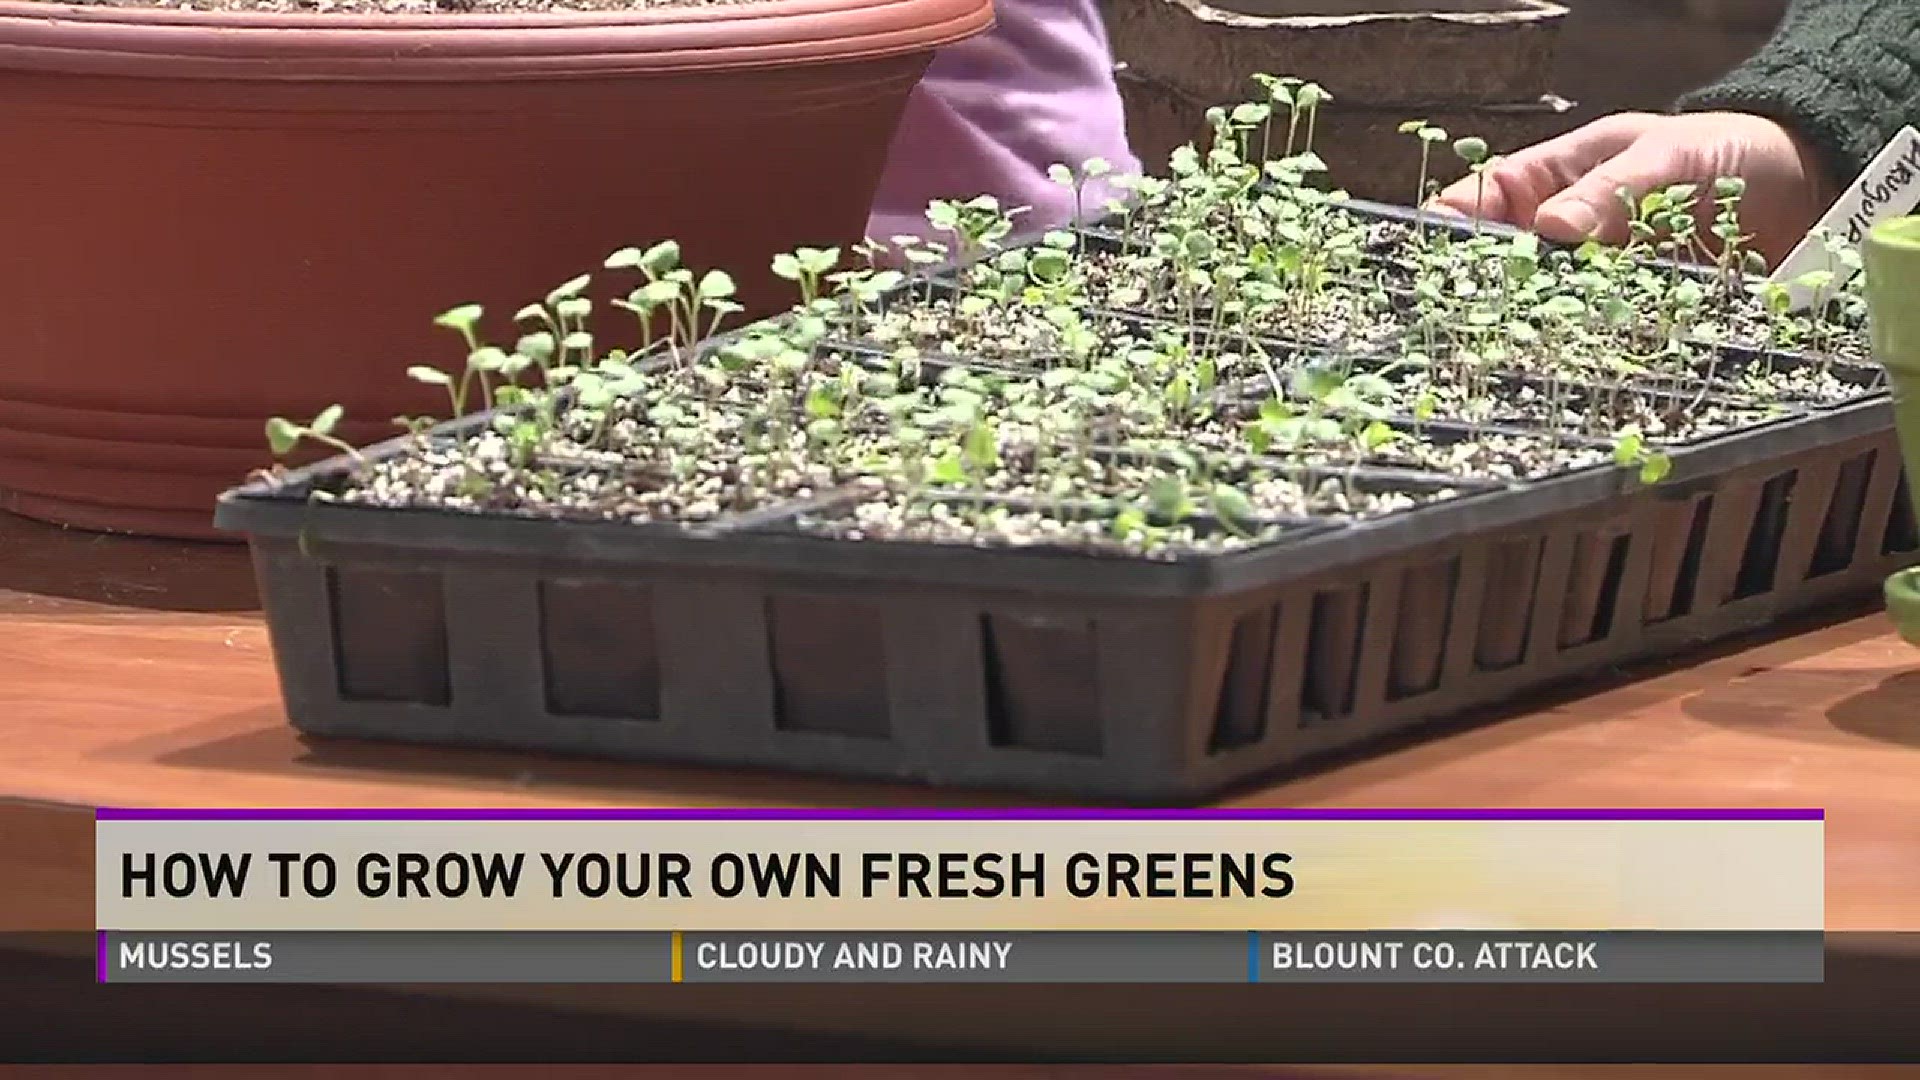 How to Grow Your Own Fresh Greens